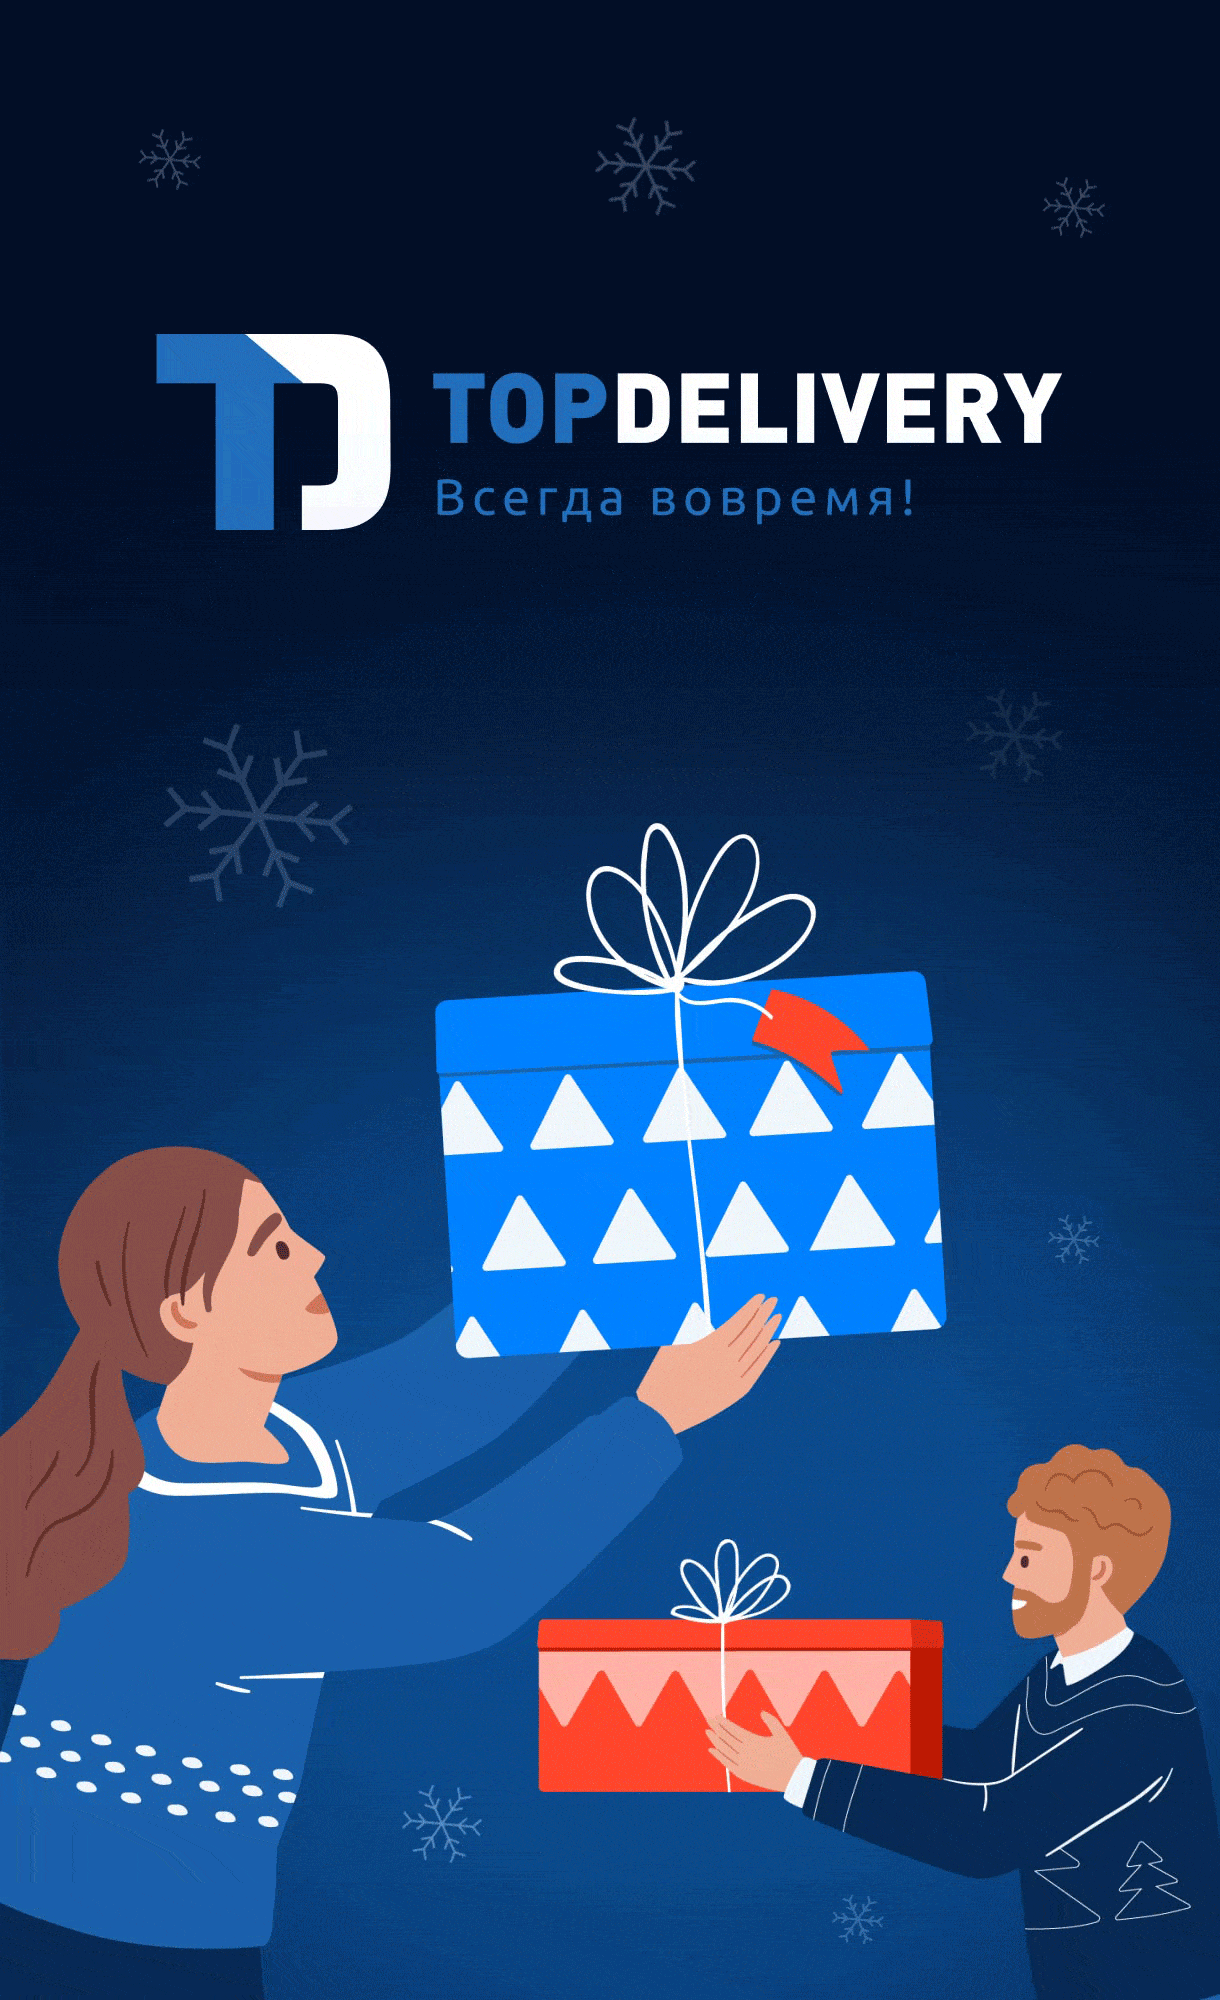 TopDelivery — разработка лендинга